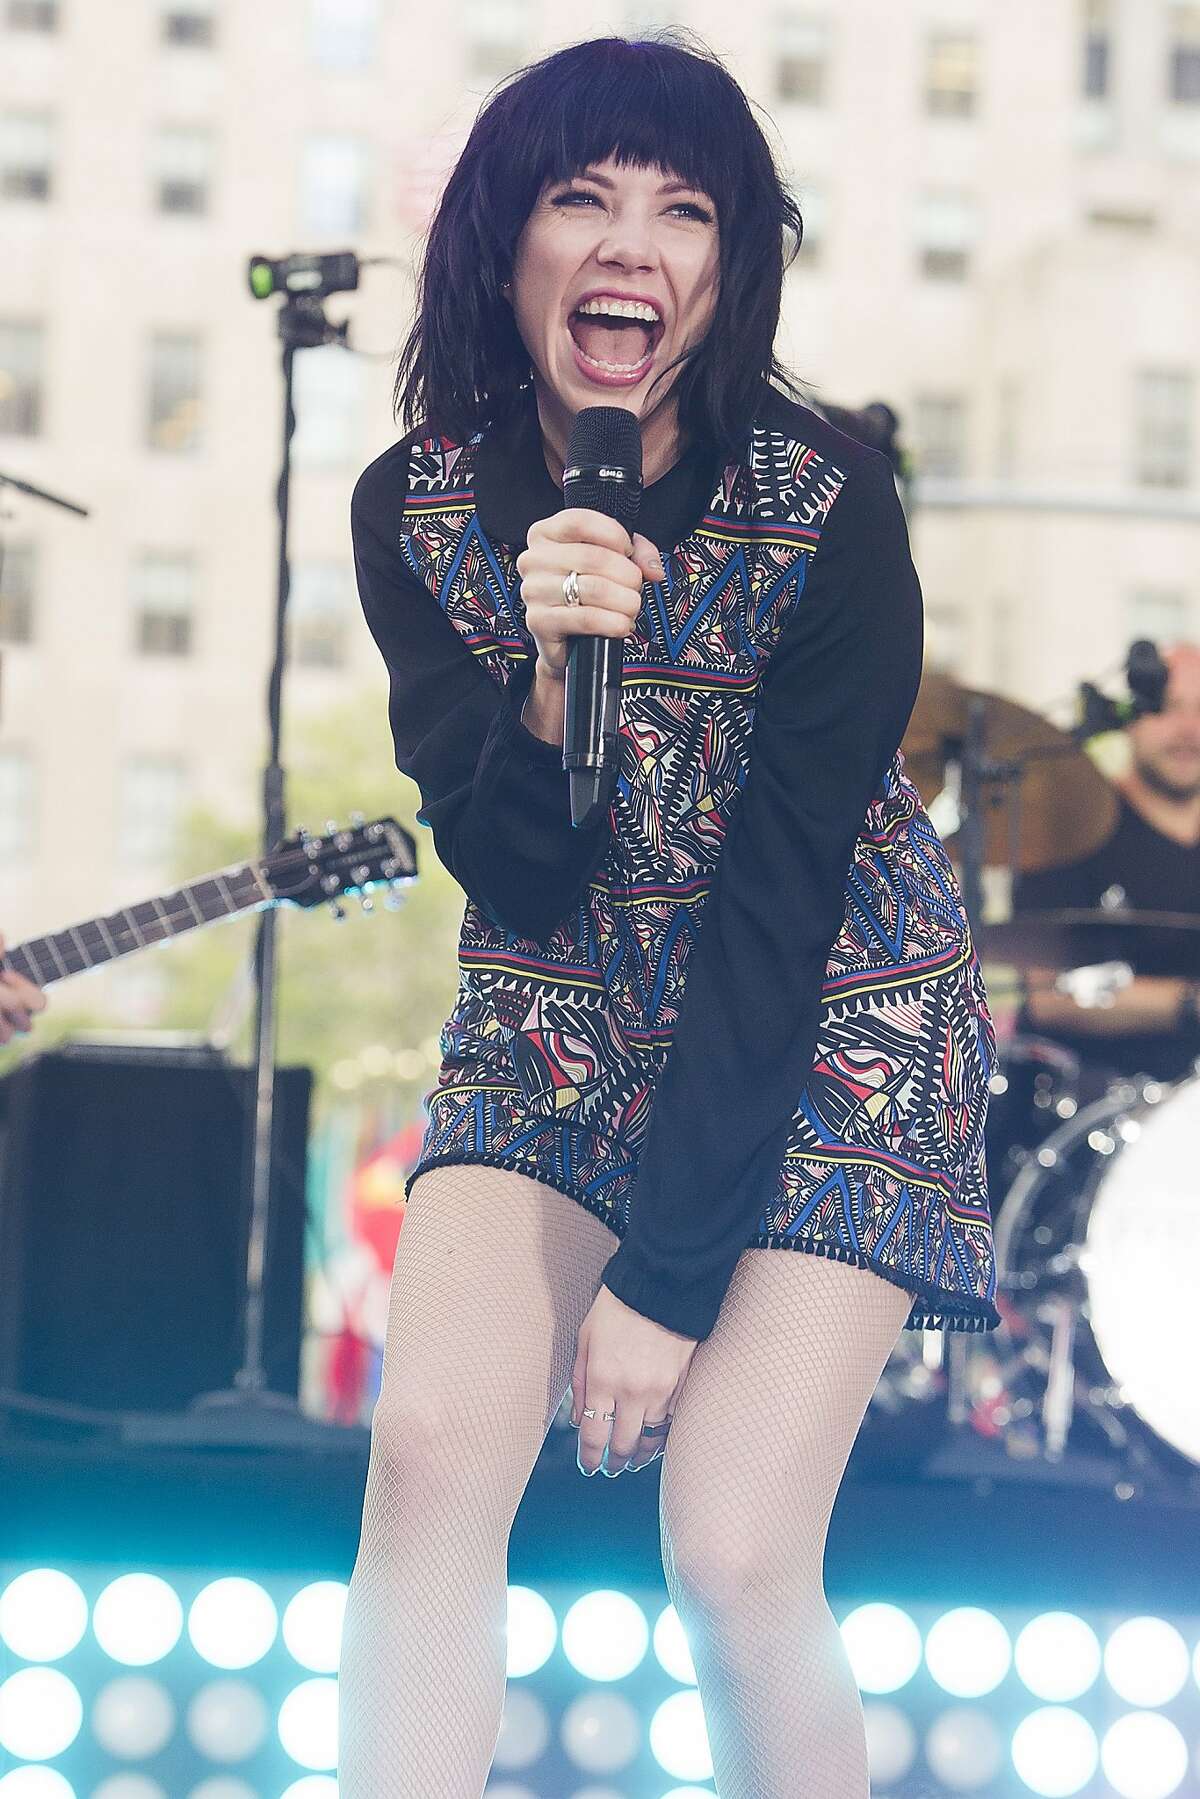 Carly Rae Jepsen performs on NBC's "Today" show on Friday, Aug. 21, 2015, in New York. (Photo by Charles Sykes/Invision/AP)